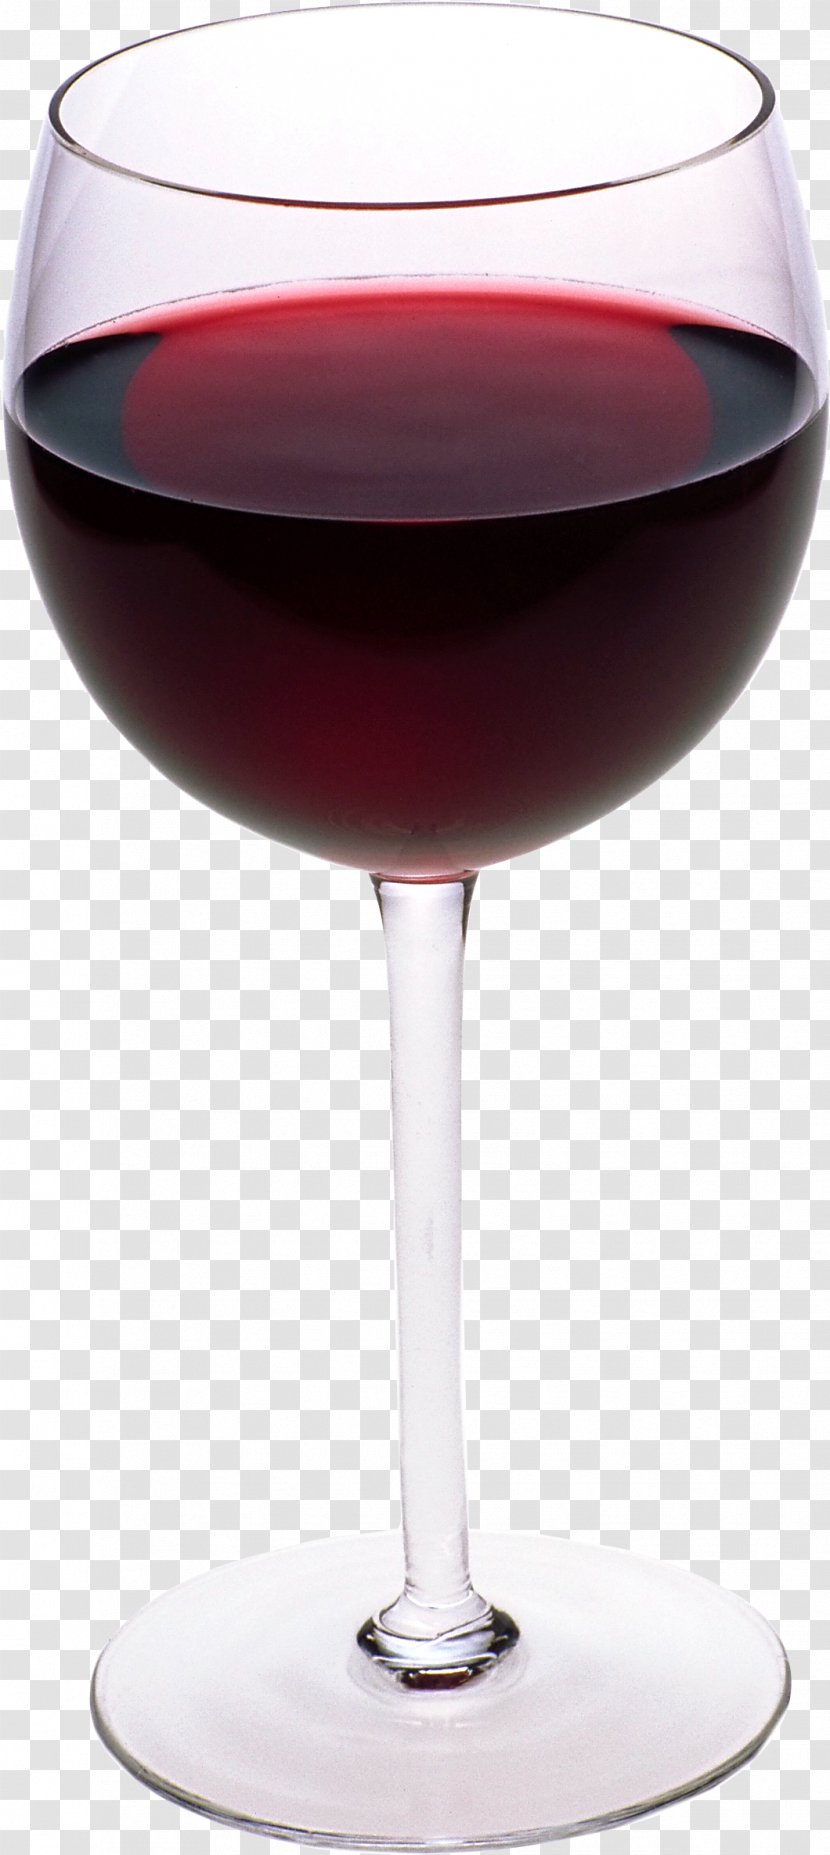 Red Wine Cocktail Glass - Drink - Image Transparent PNG